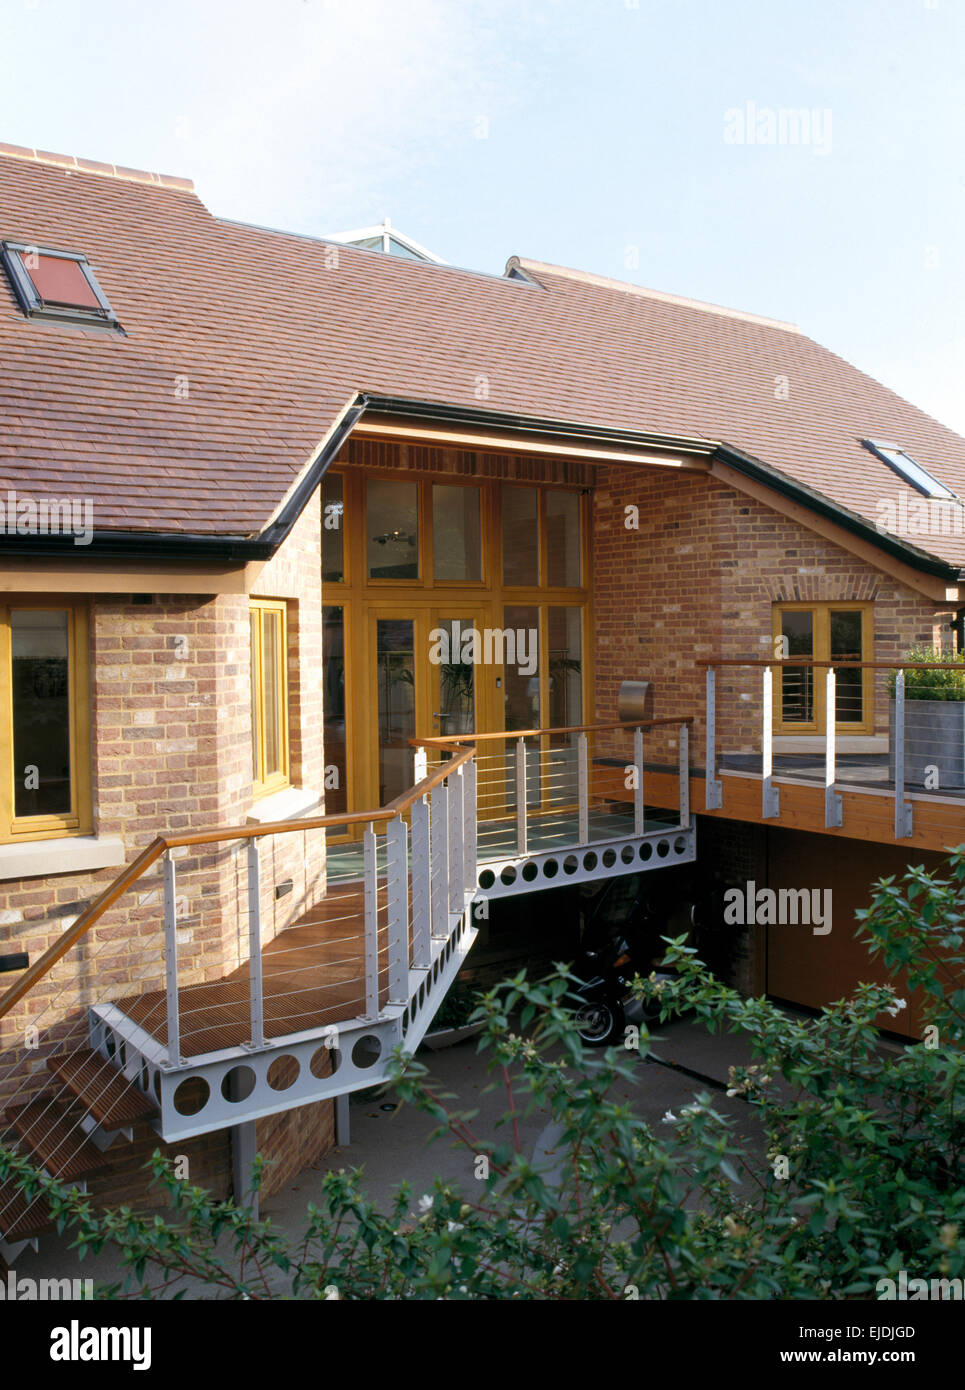 Exterior of single storey new build house with metal banisters on walkway Stock Photo